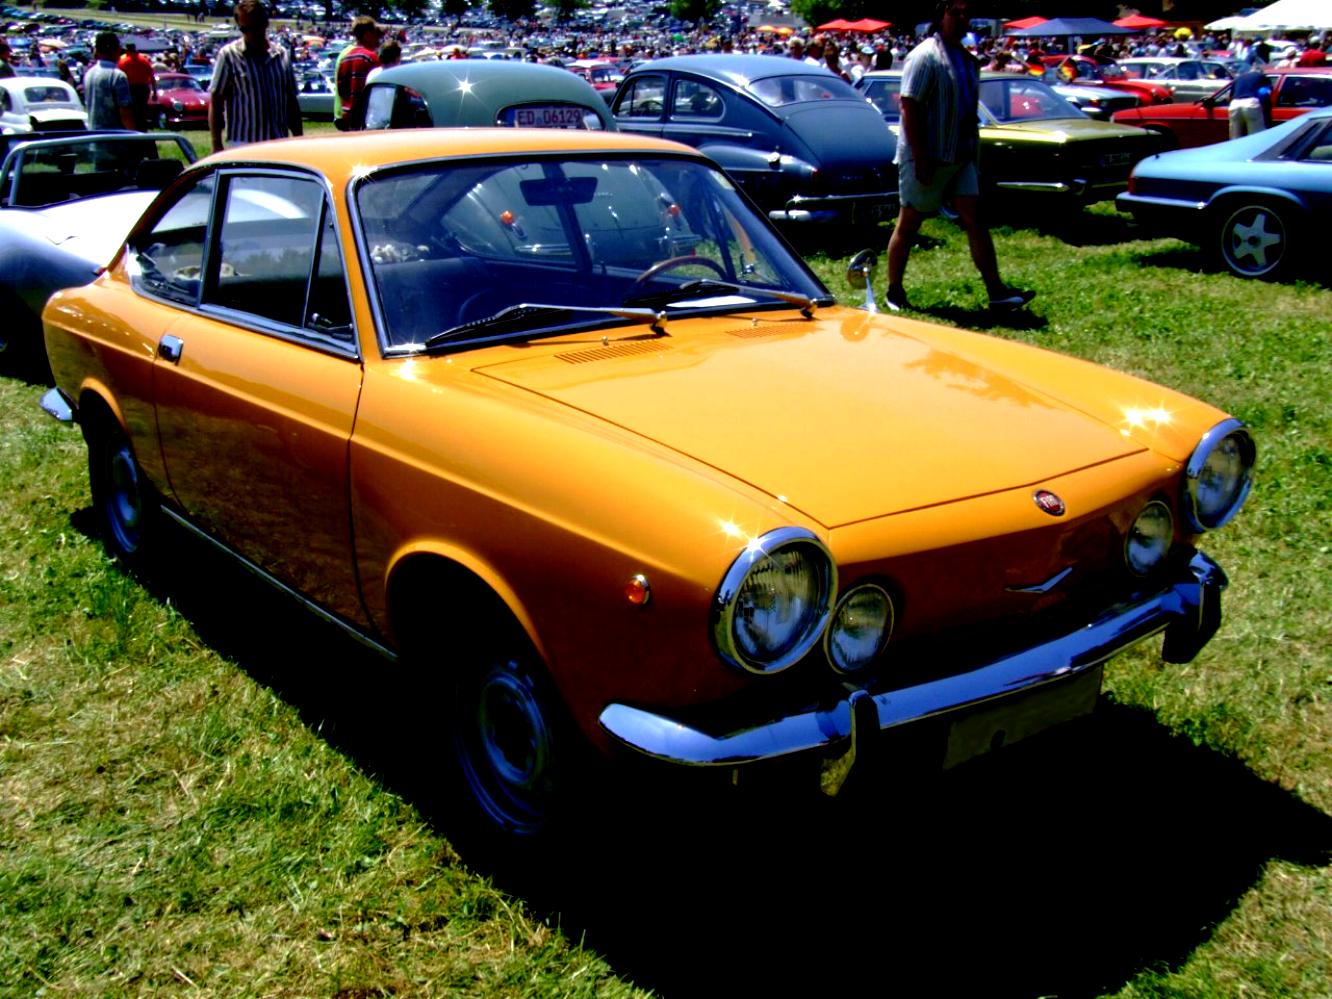 Fiat 850 Sport Coupe 1968 #2